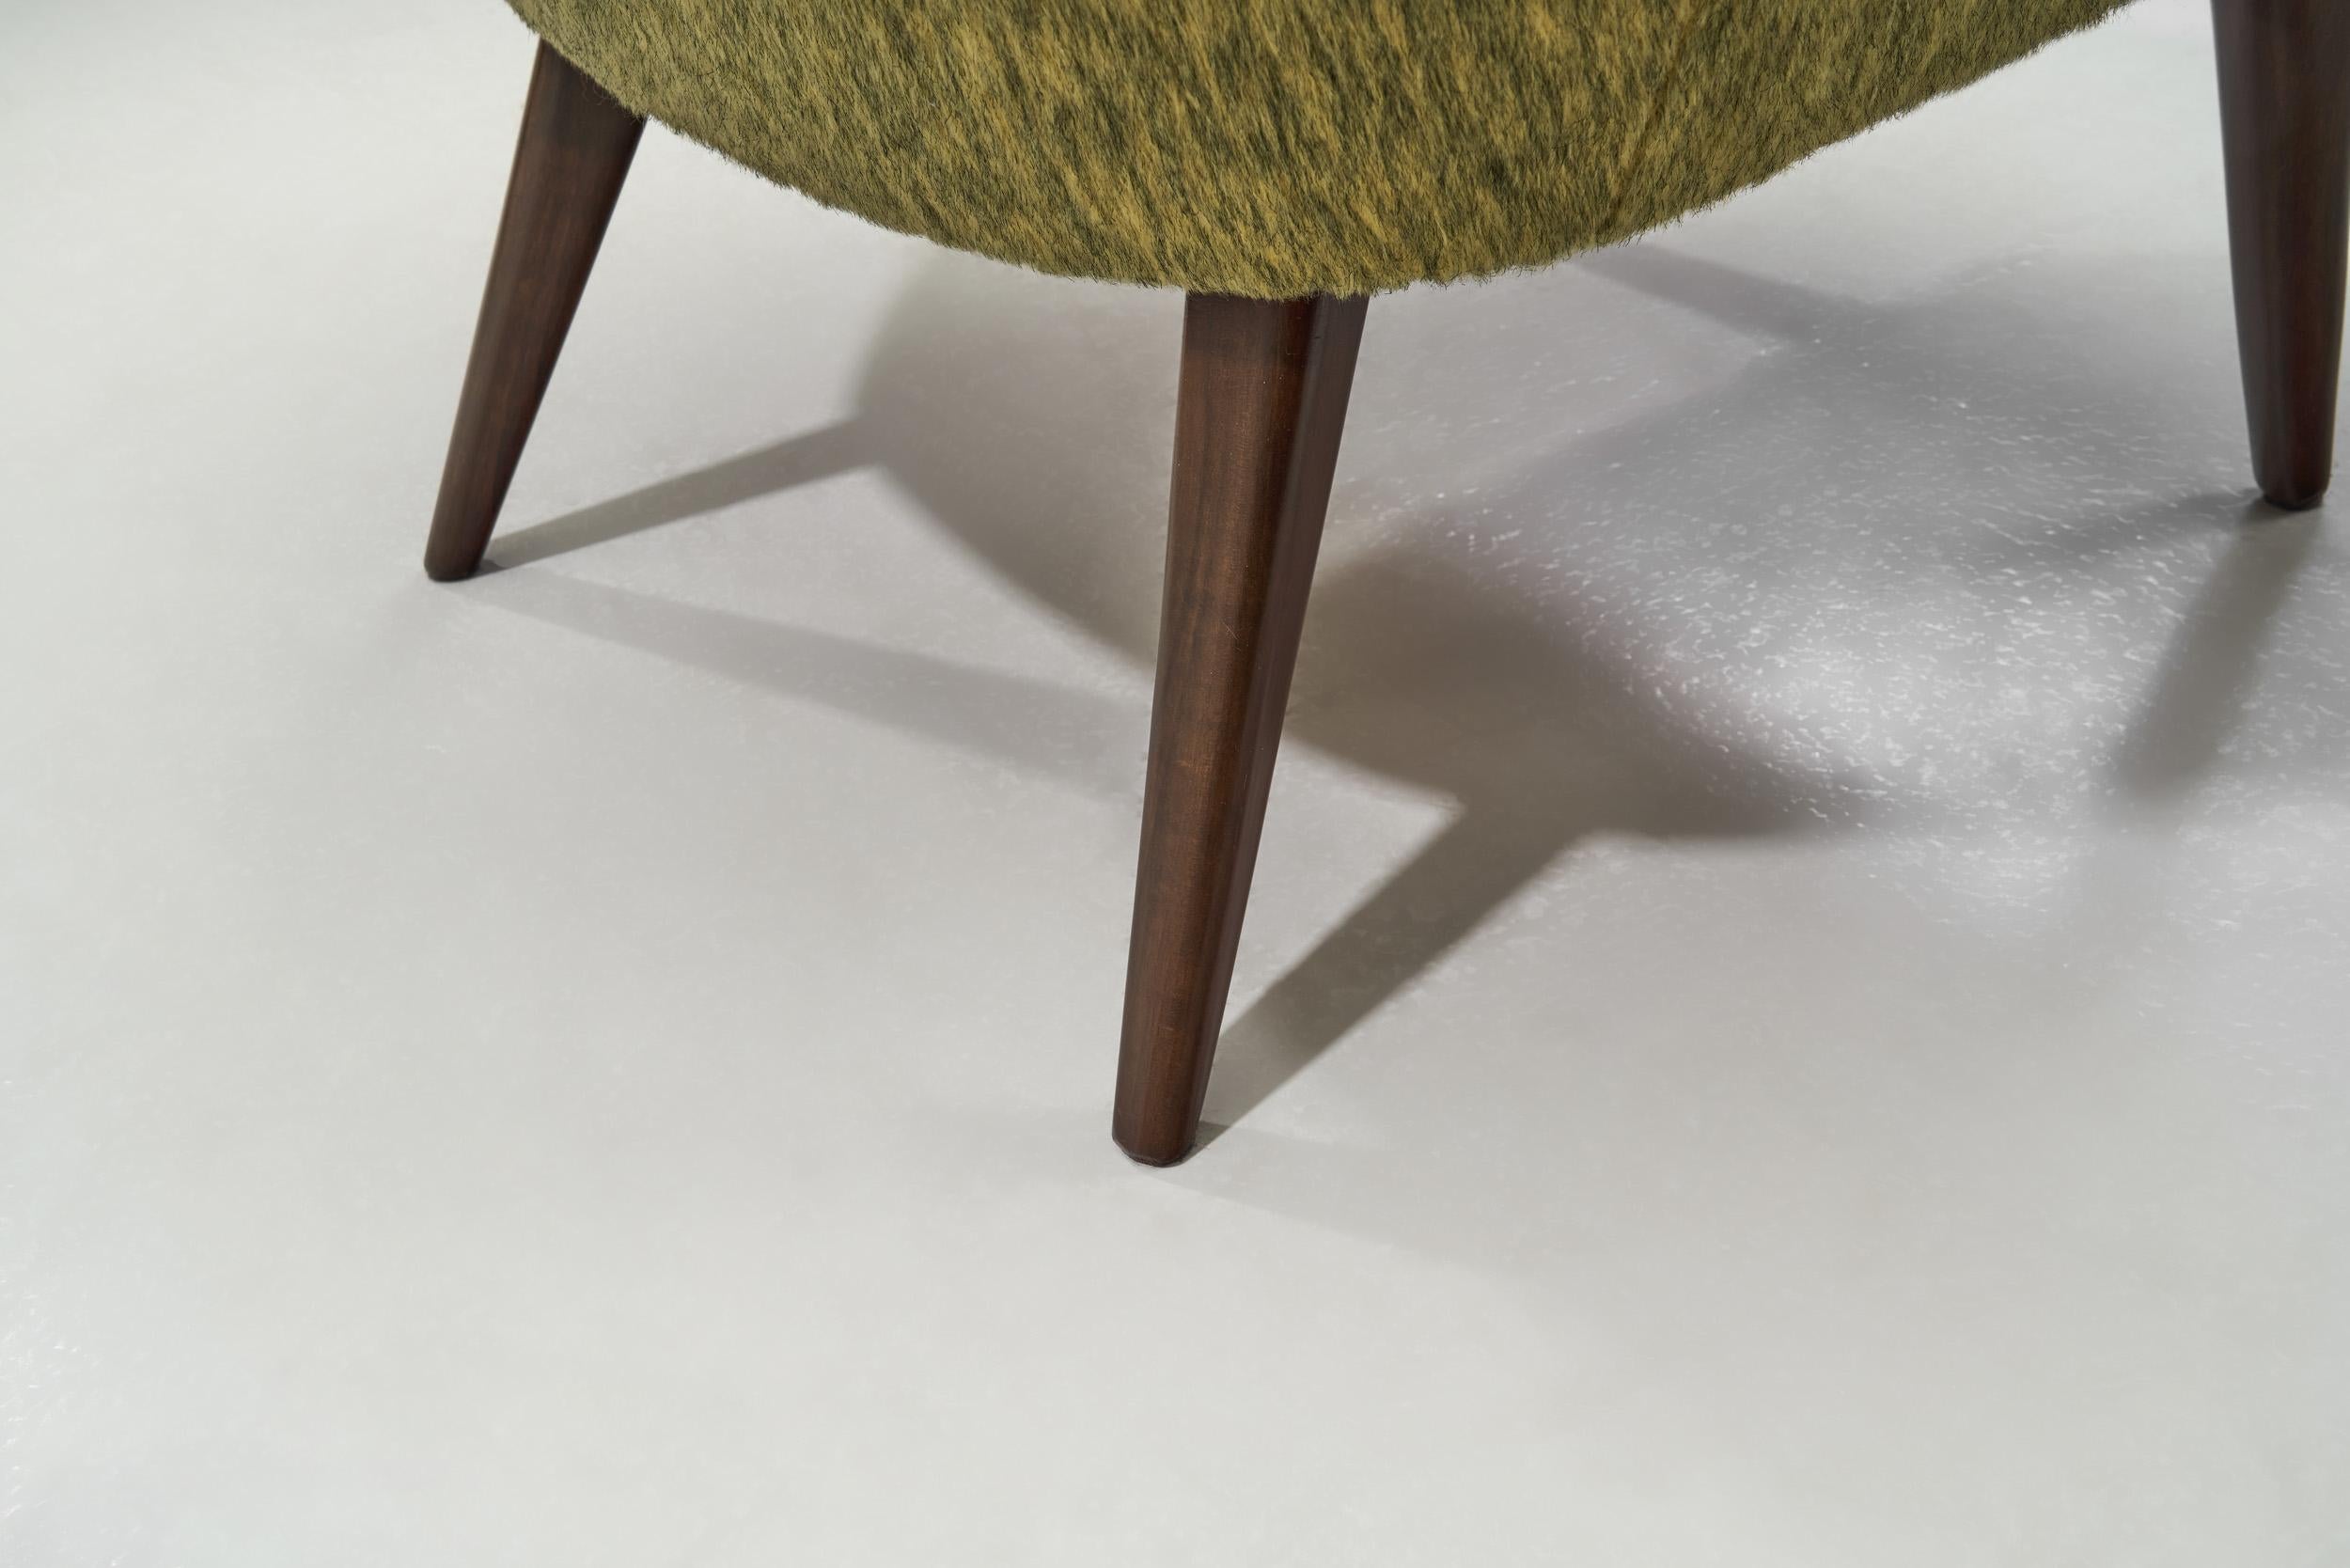 Cocktail Chairs with Dark Glazed Cherry Wood Legs, Europe, 1950s For Sale 8